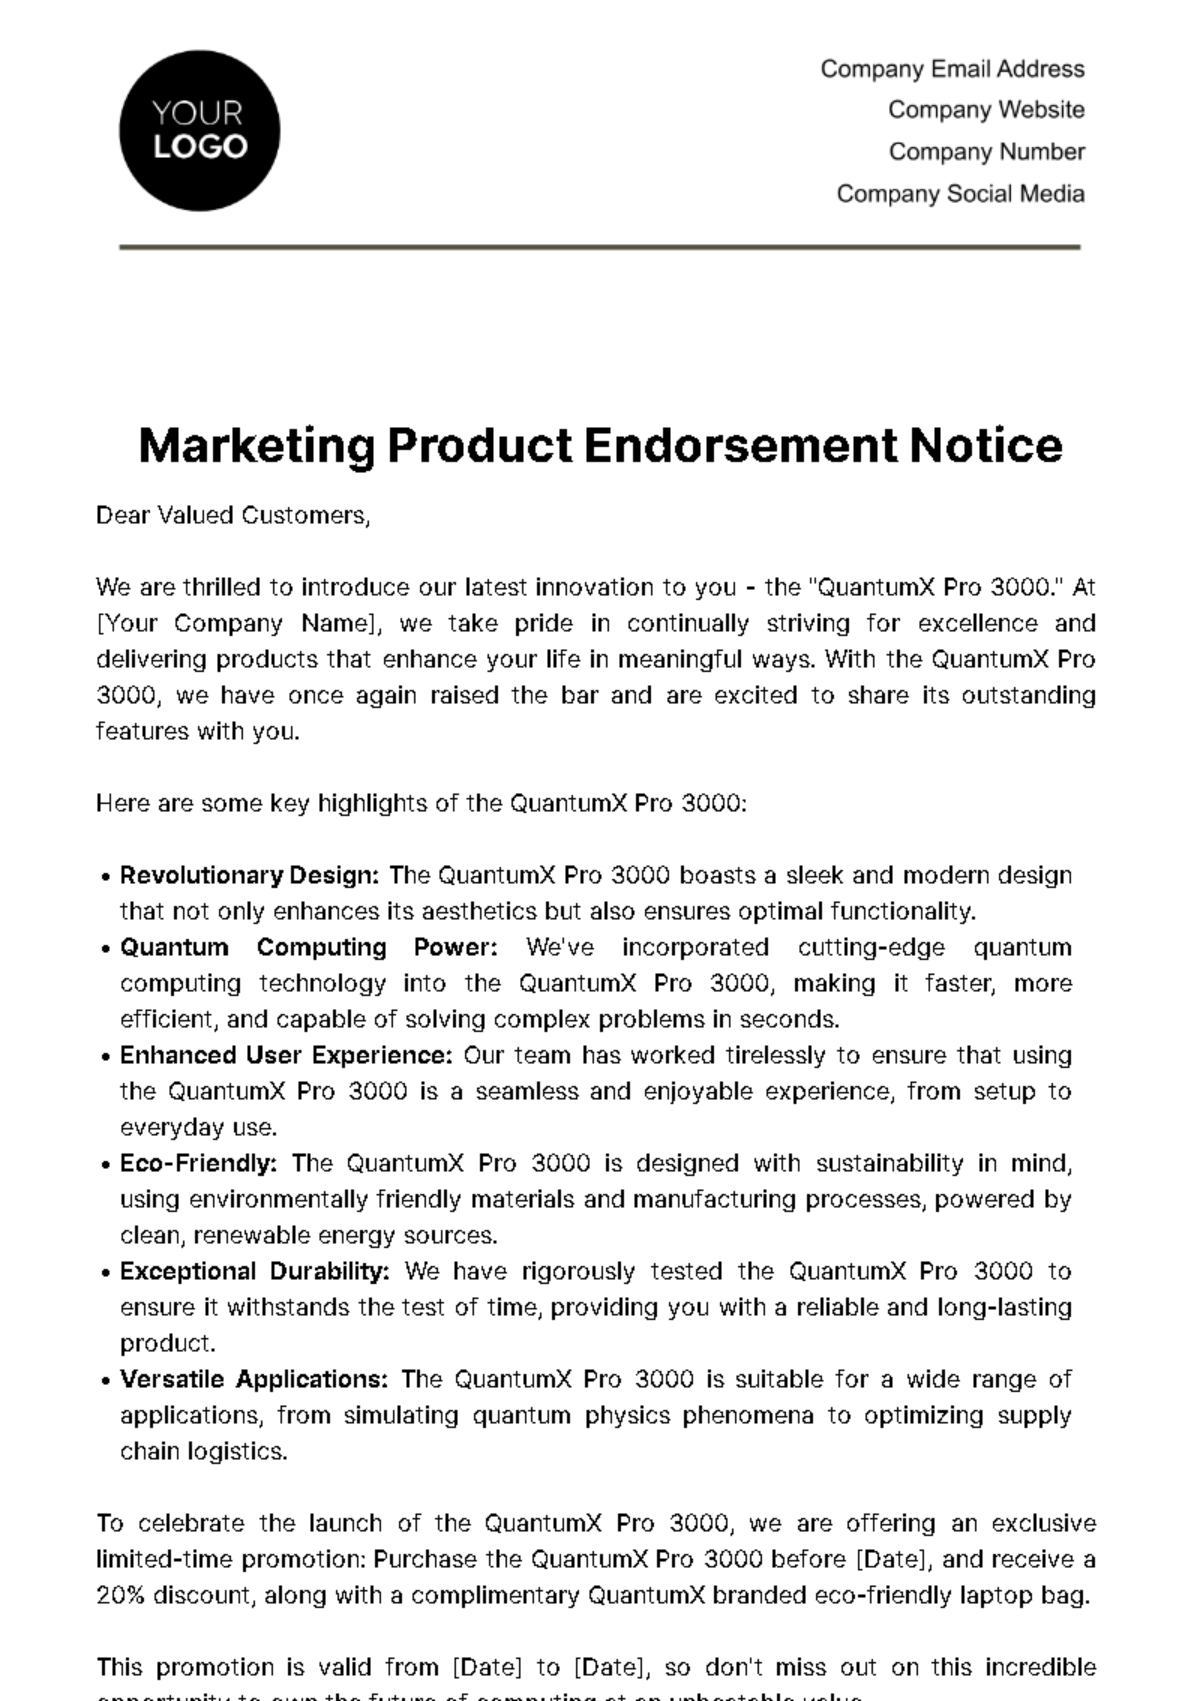 Free Marketing Product Endorsement Notice Template